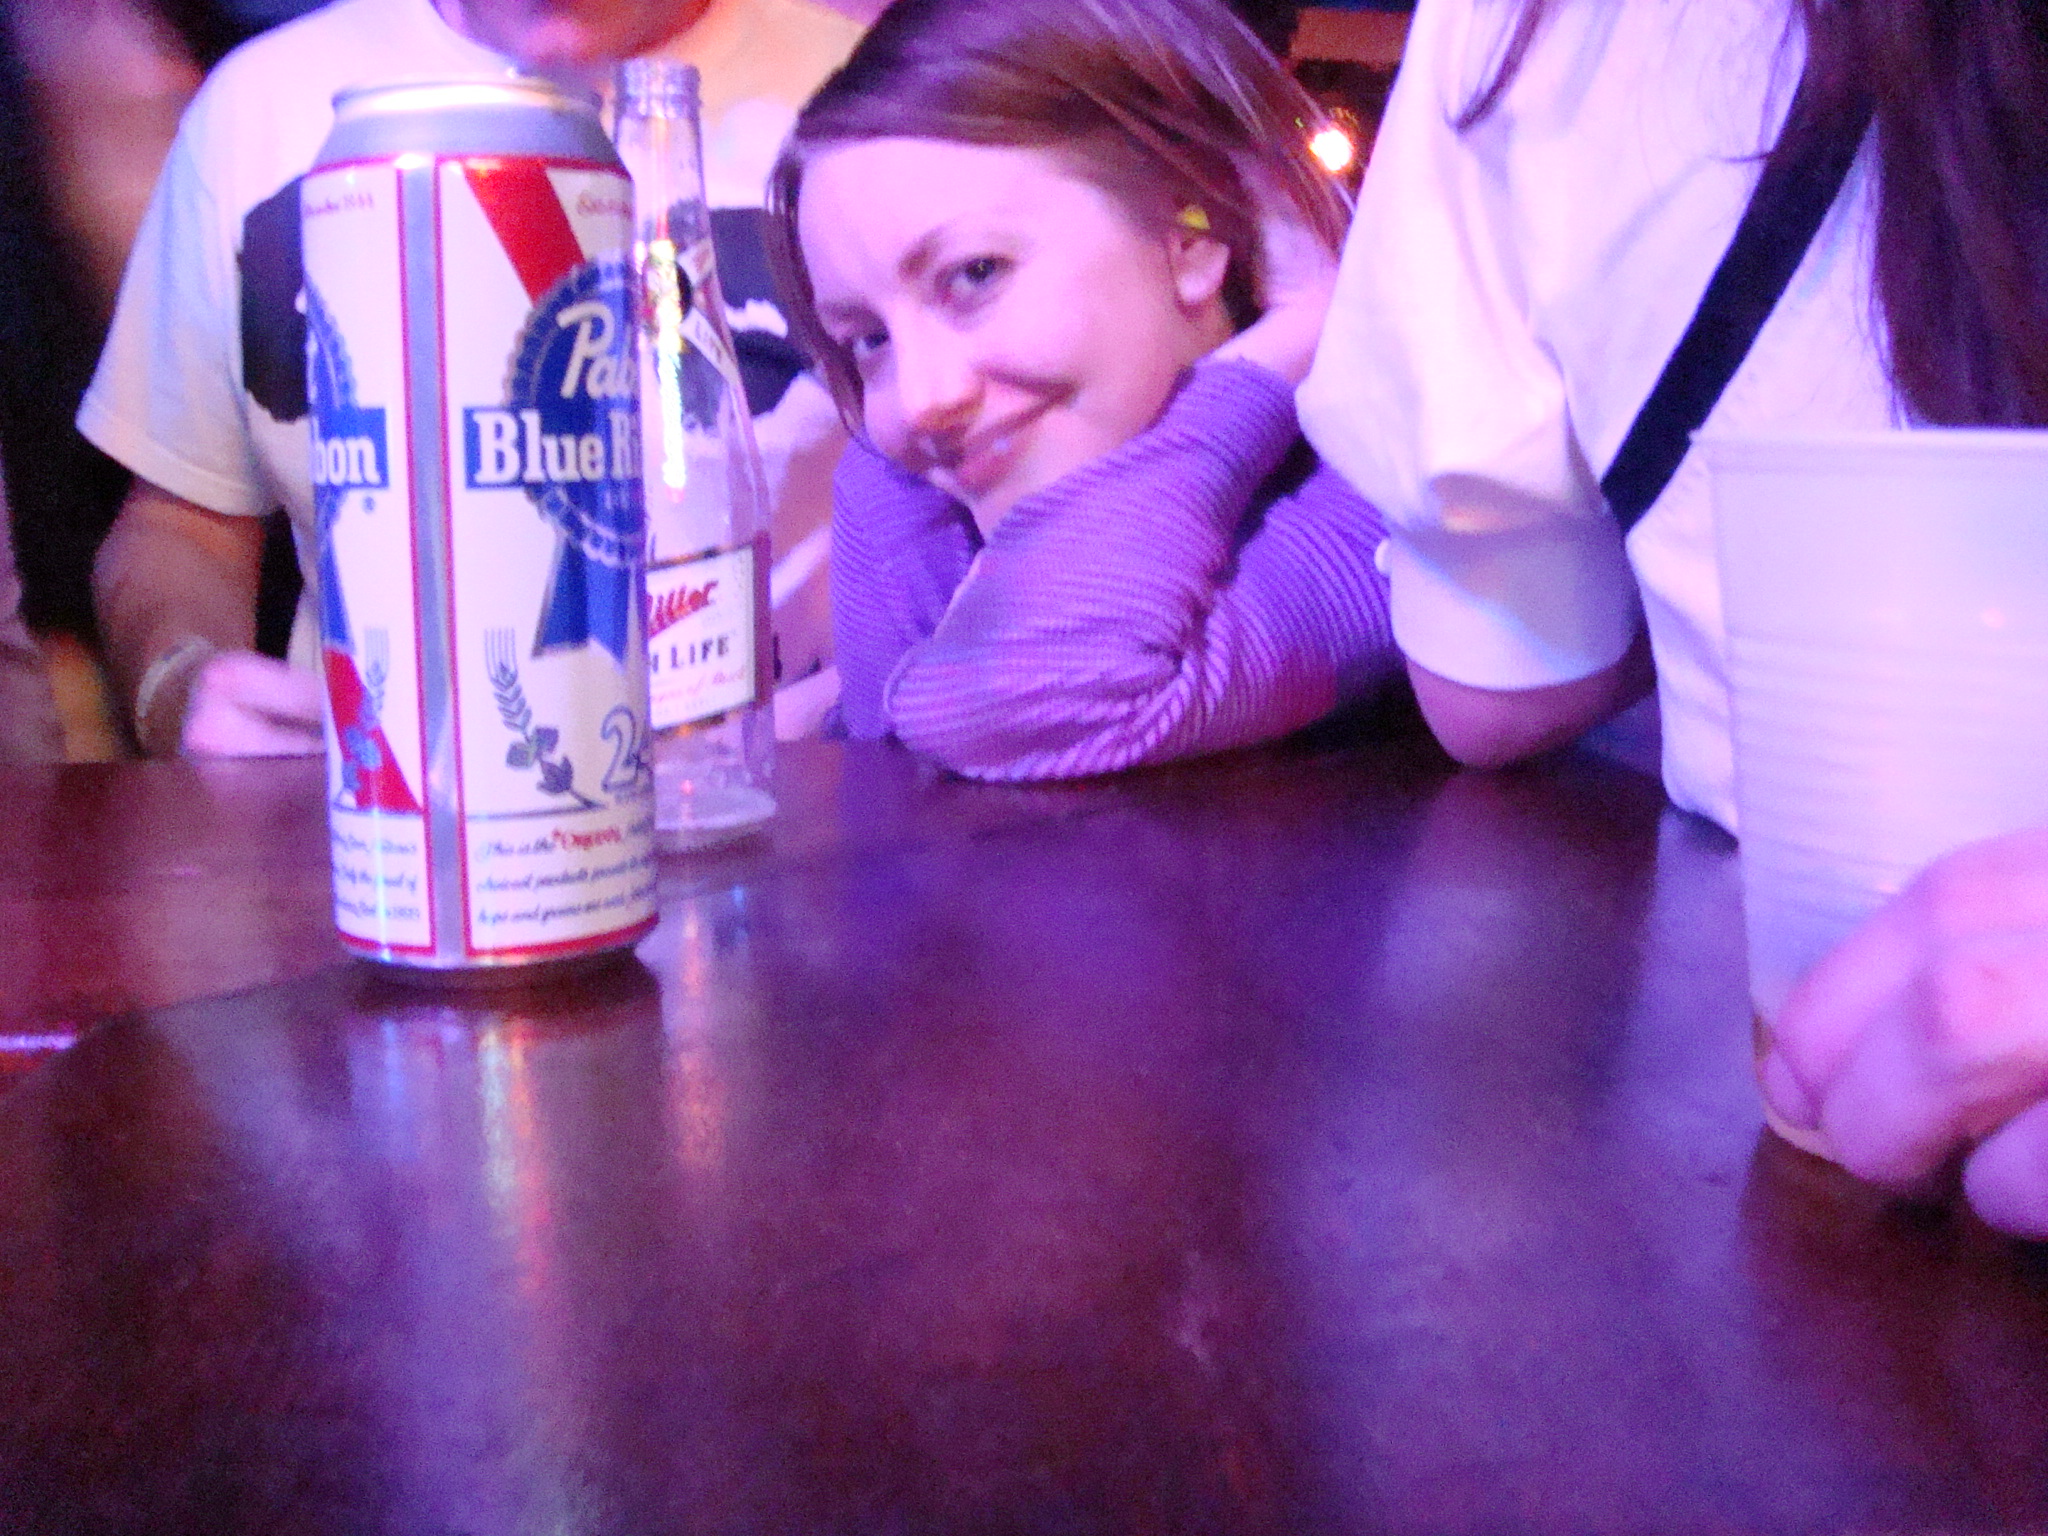 a smiling girl leaning on a beer can in front of other people